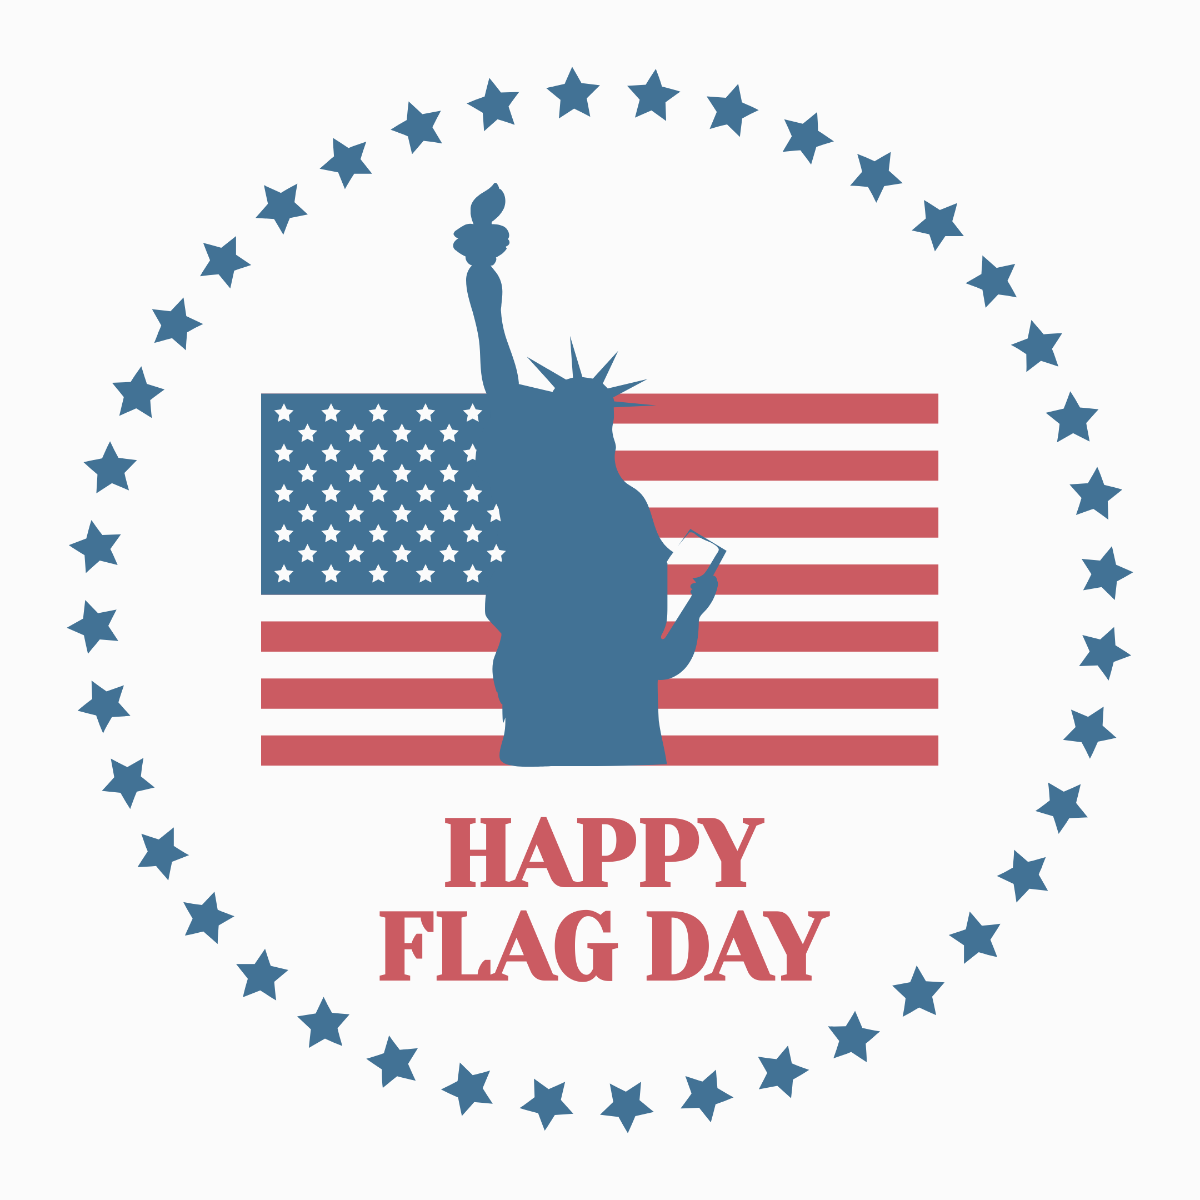 Free Modern Happy Flag Day Template